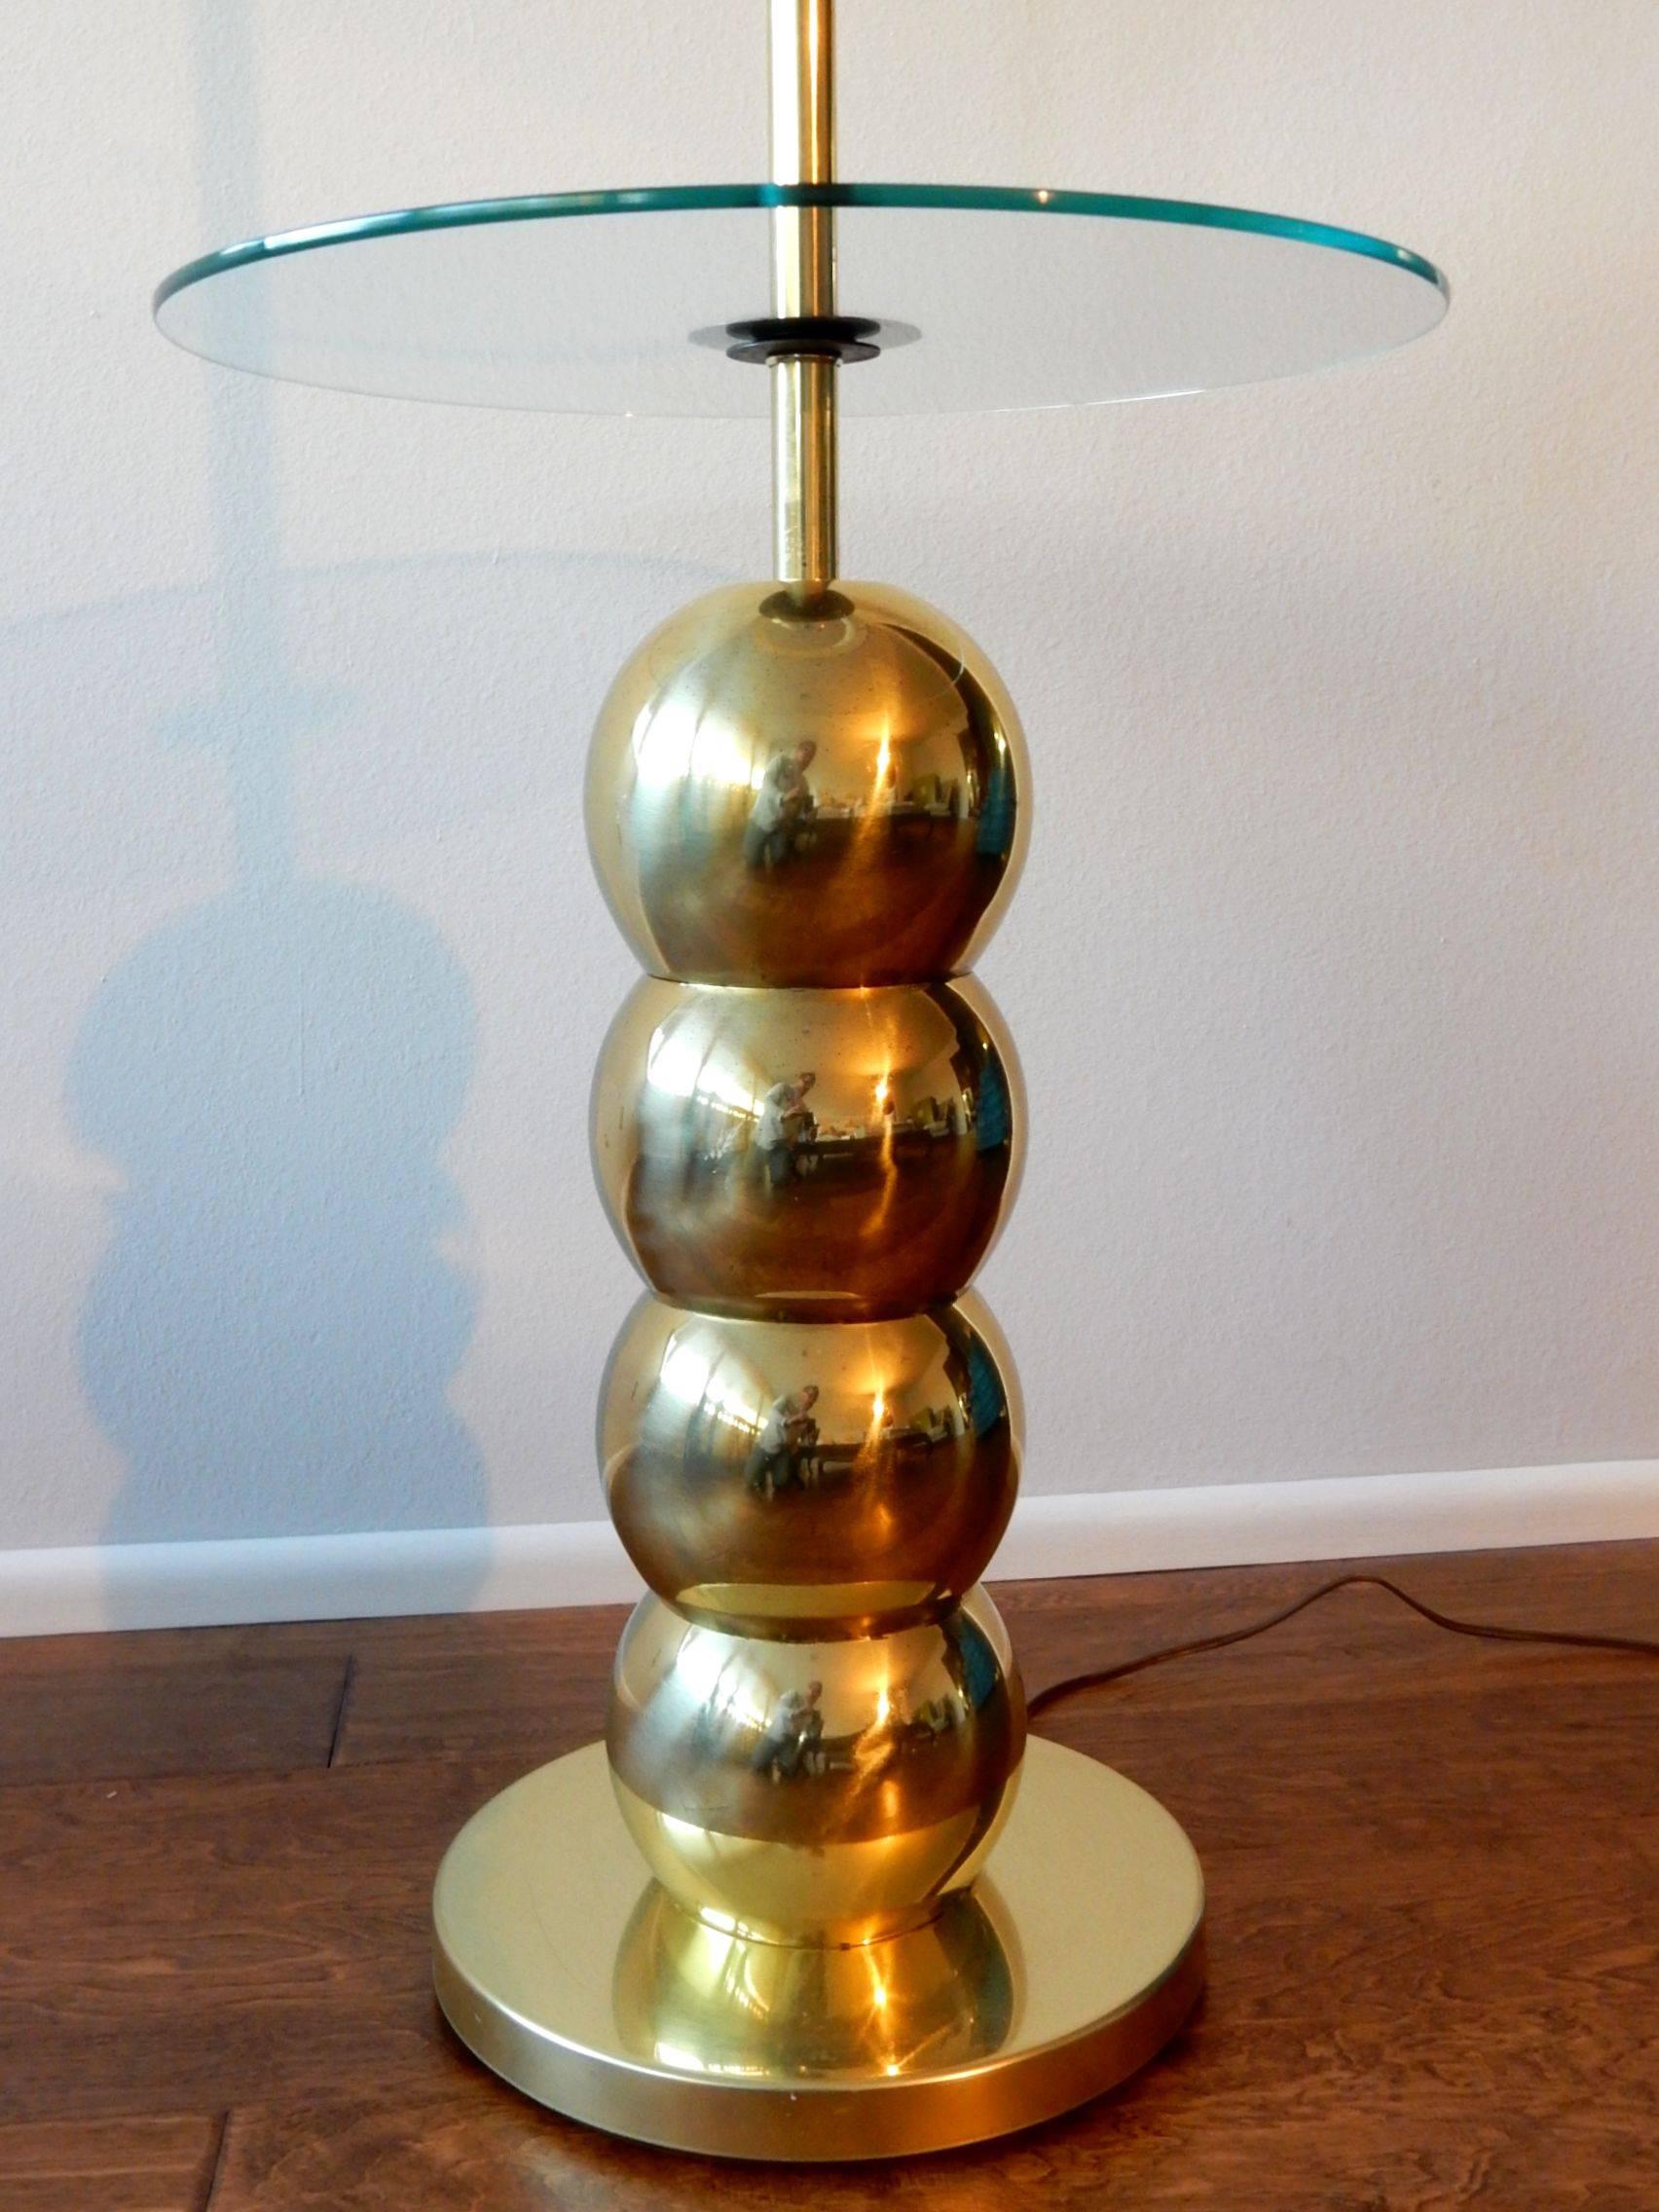 Rare brass stacked ball floor lamp/table designed by George Kovacs circa 1969.
Floating 16